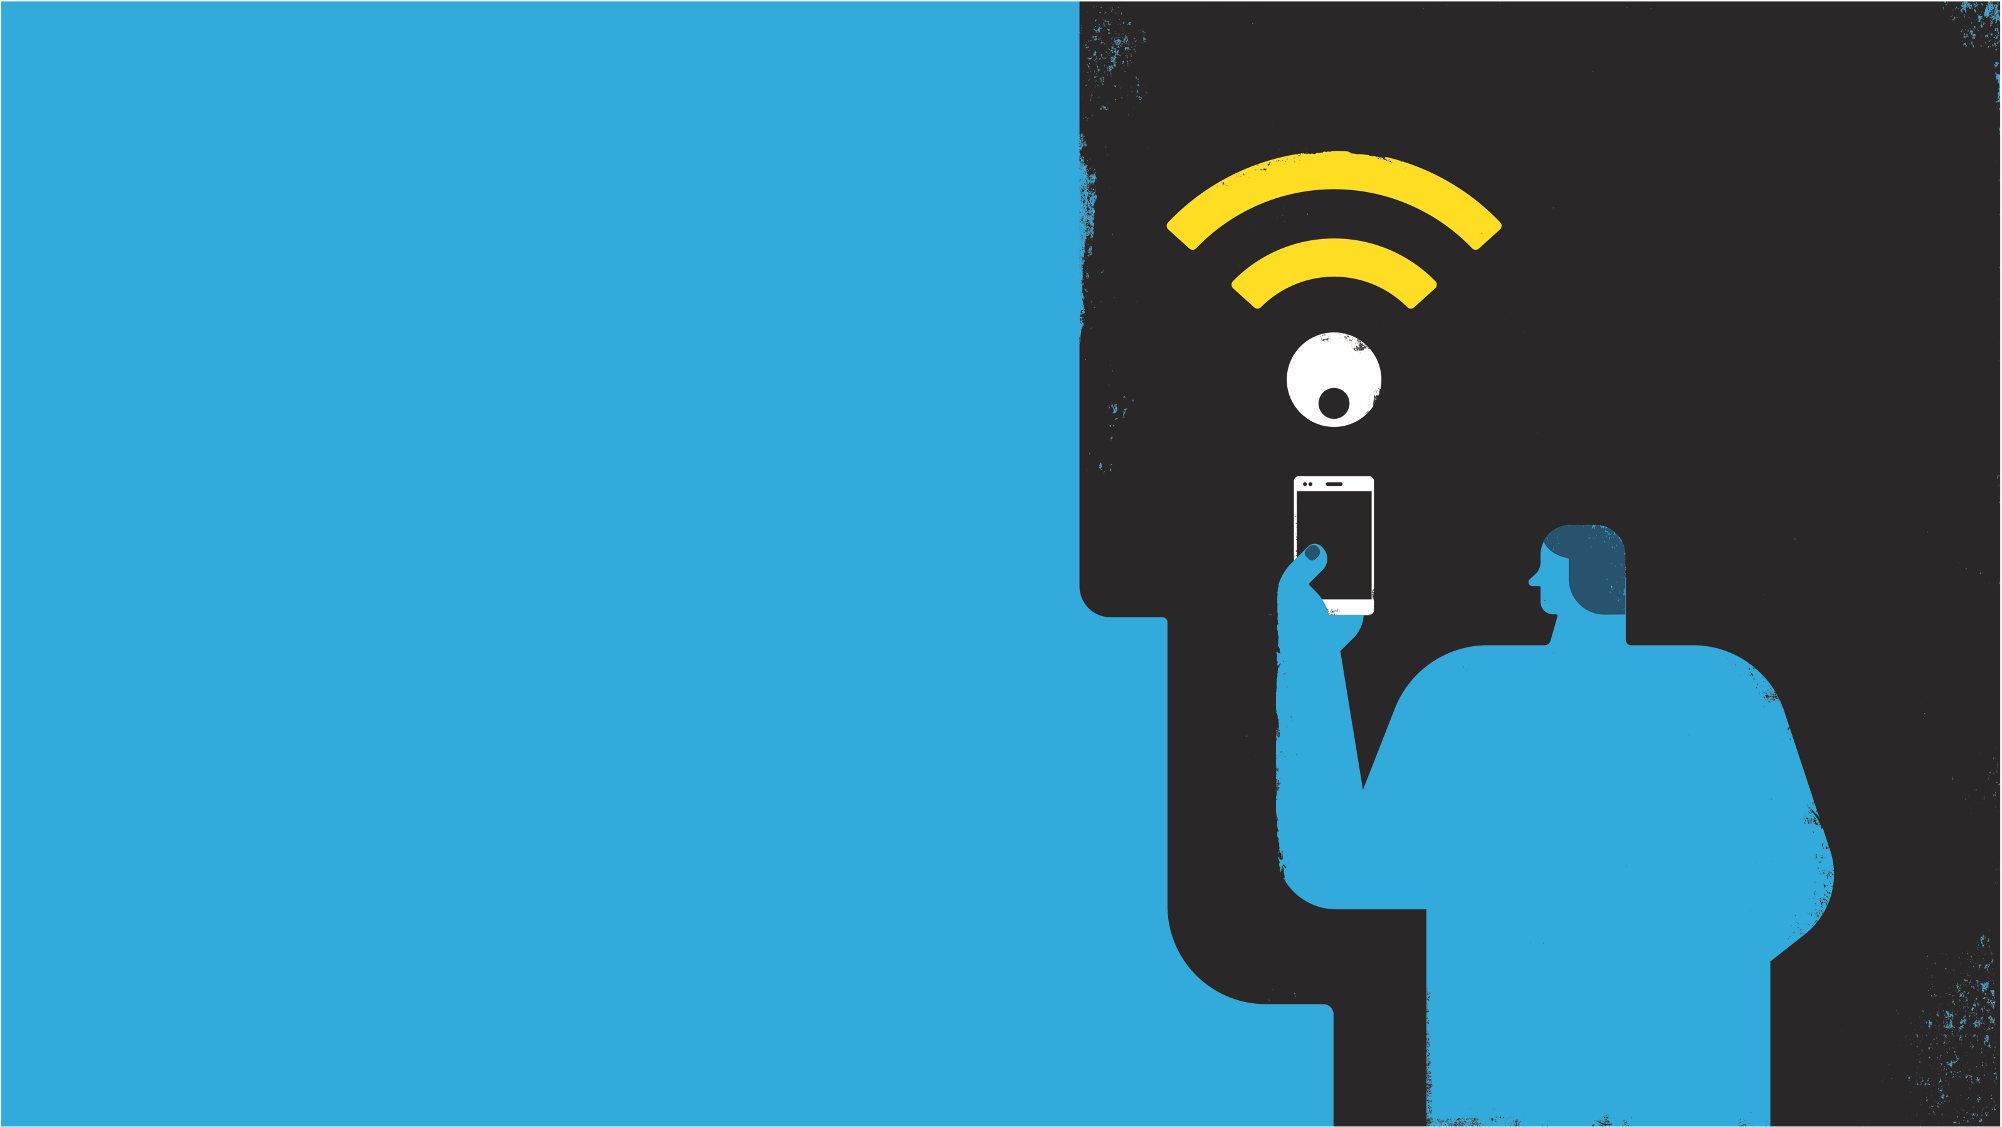 Illustration of a person holding up their phone with a wifi signal